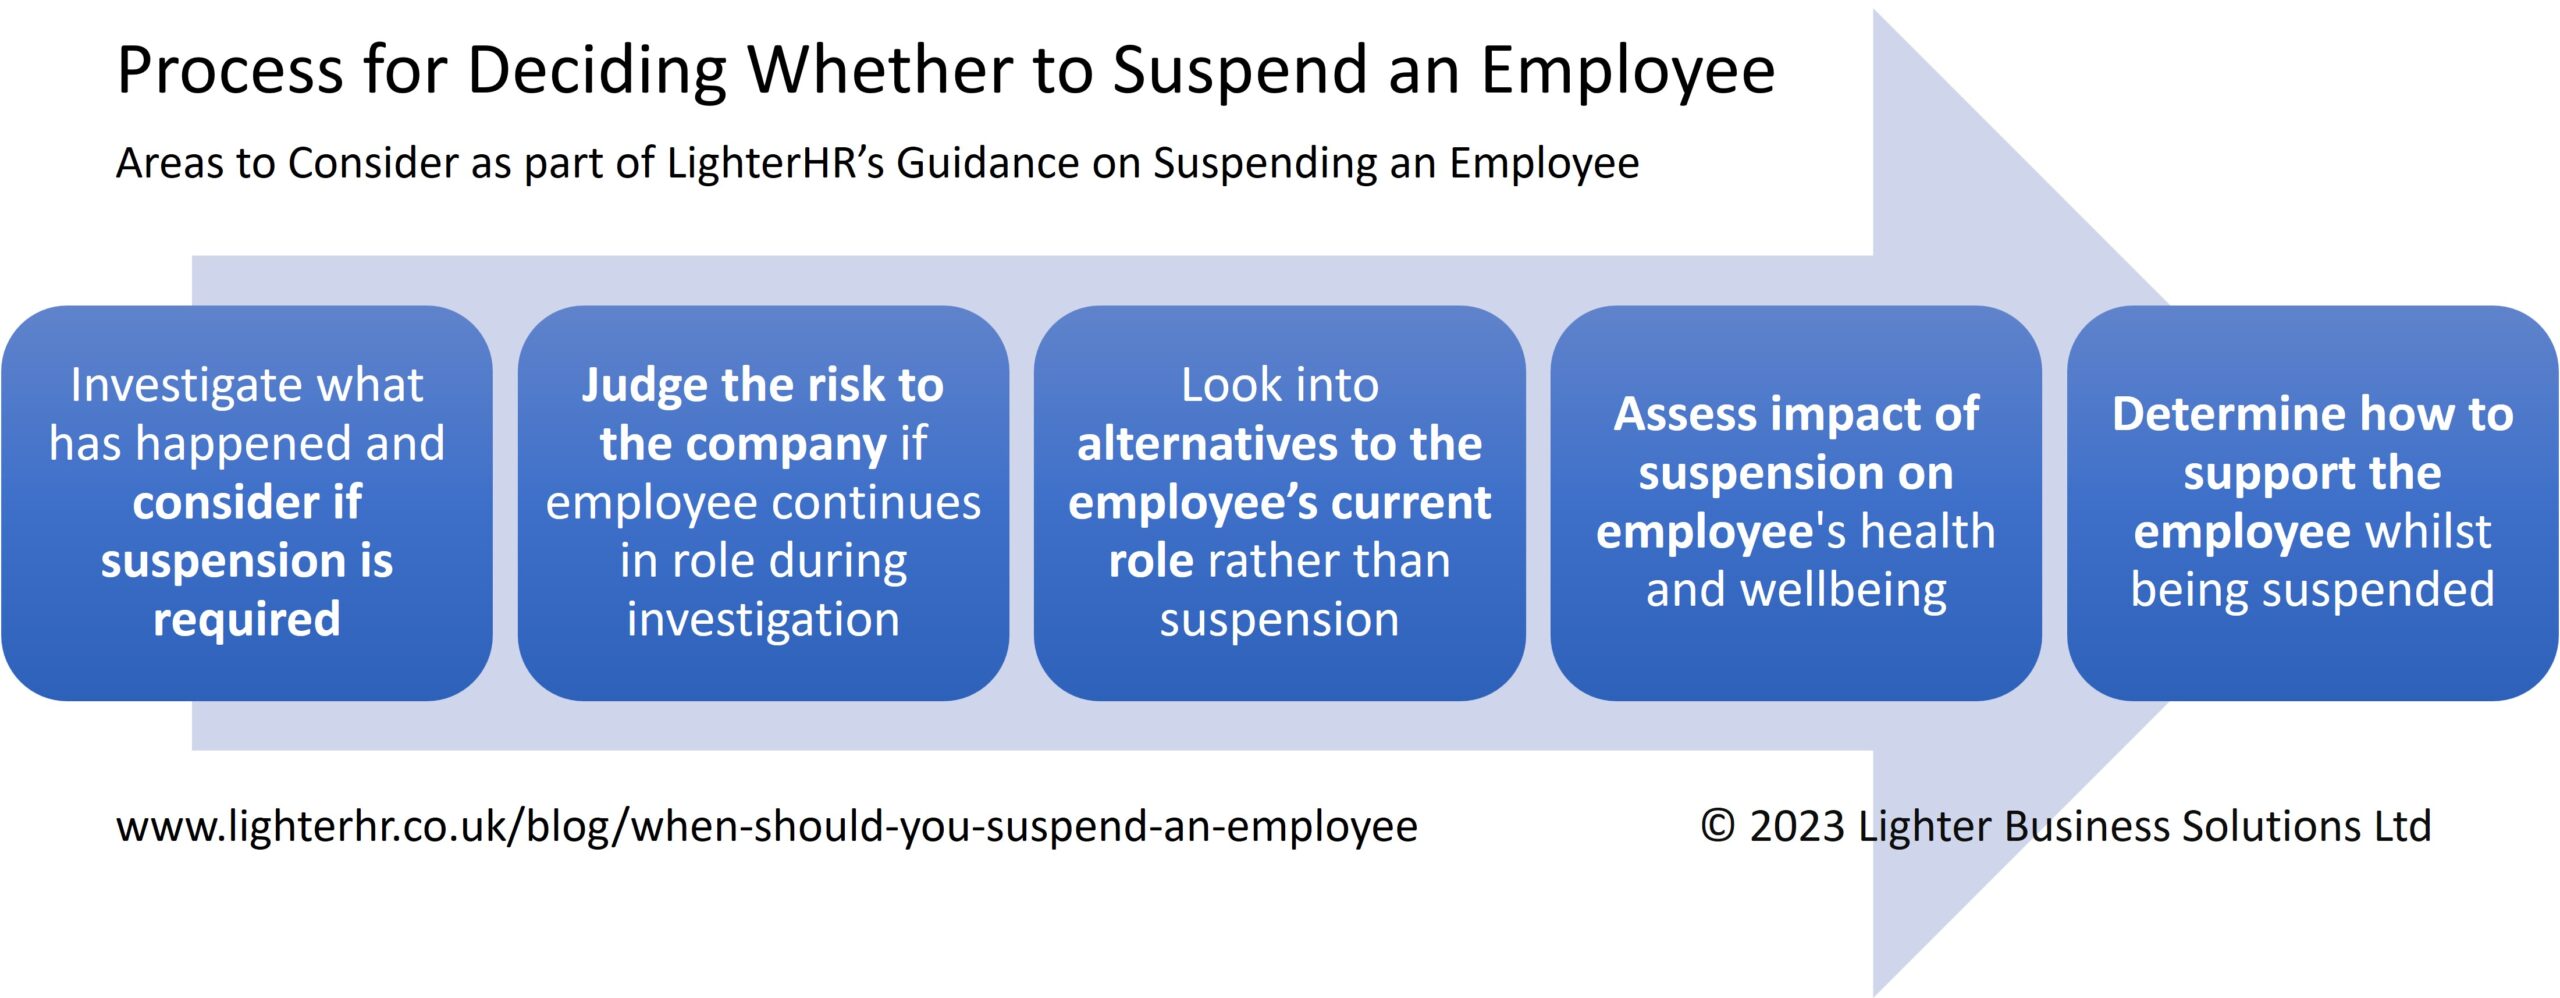 Process for Deciding Whether to Suspend an Employee - LighterHR